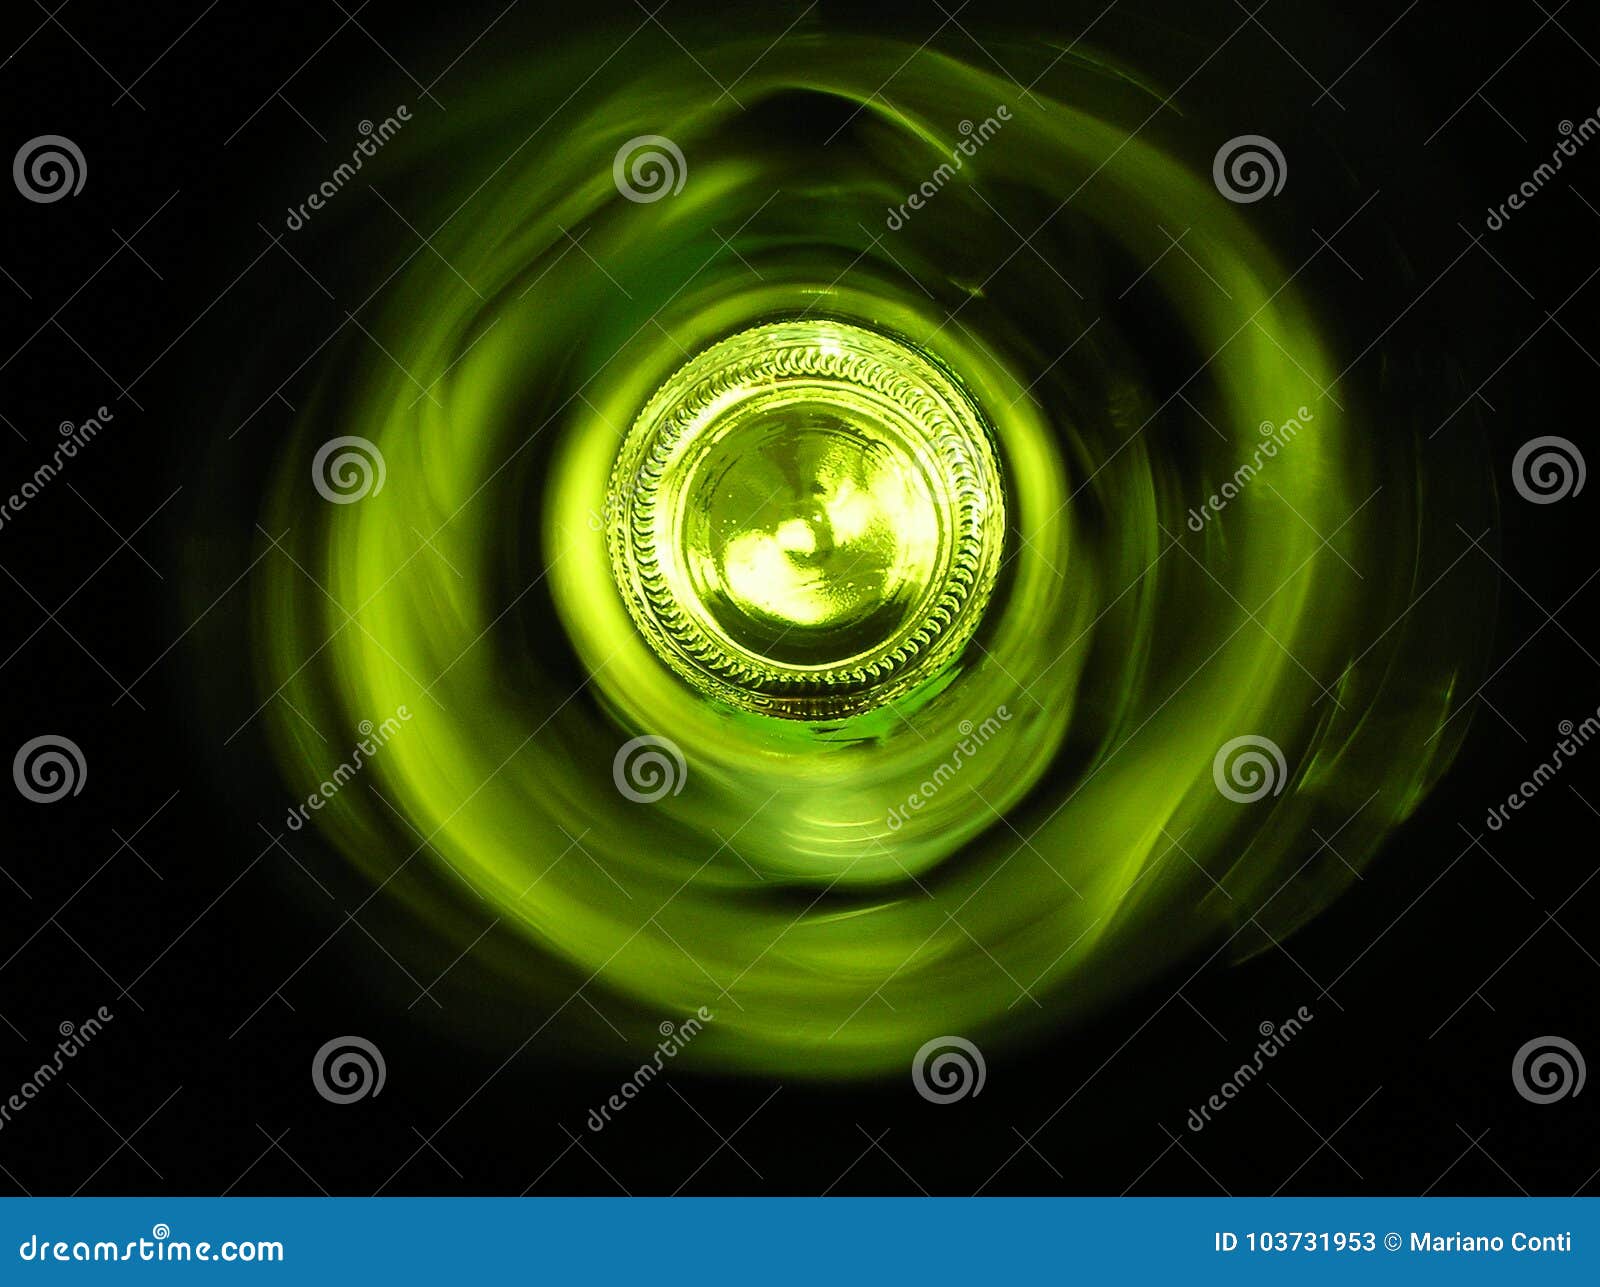 background of a green bottle